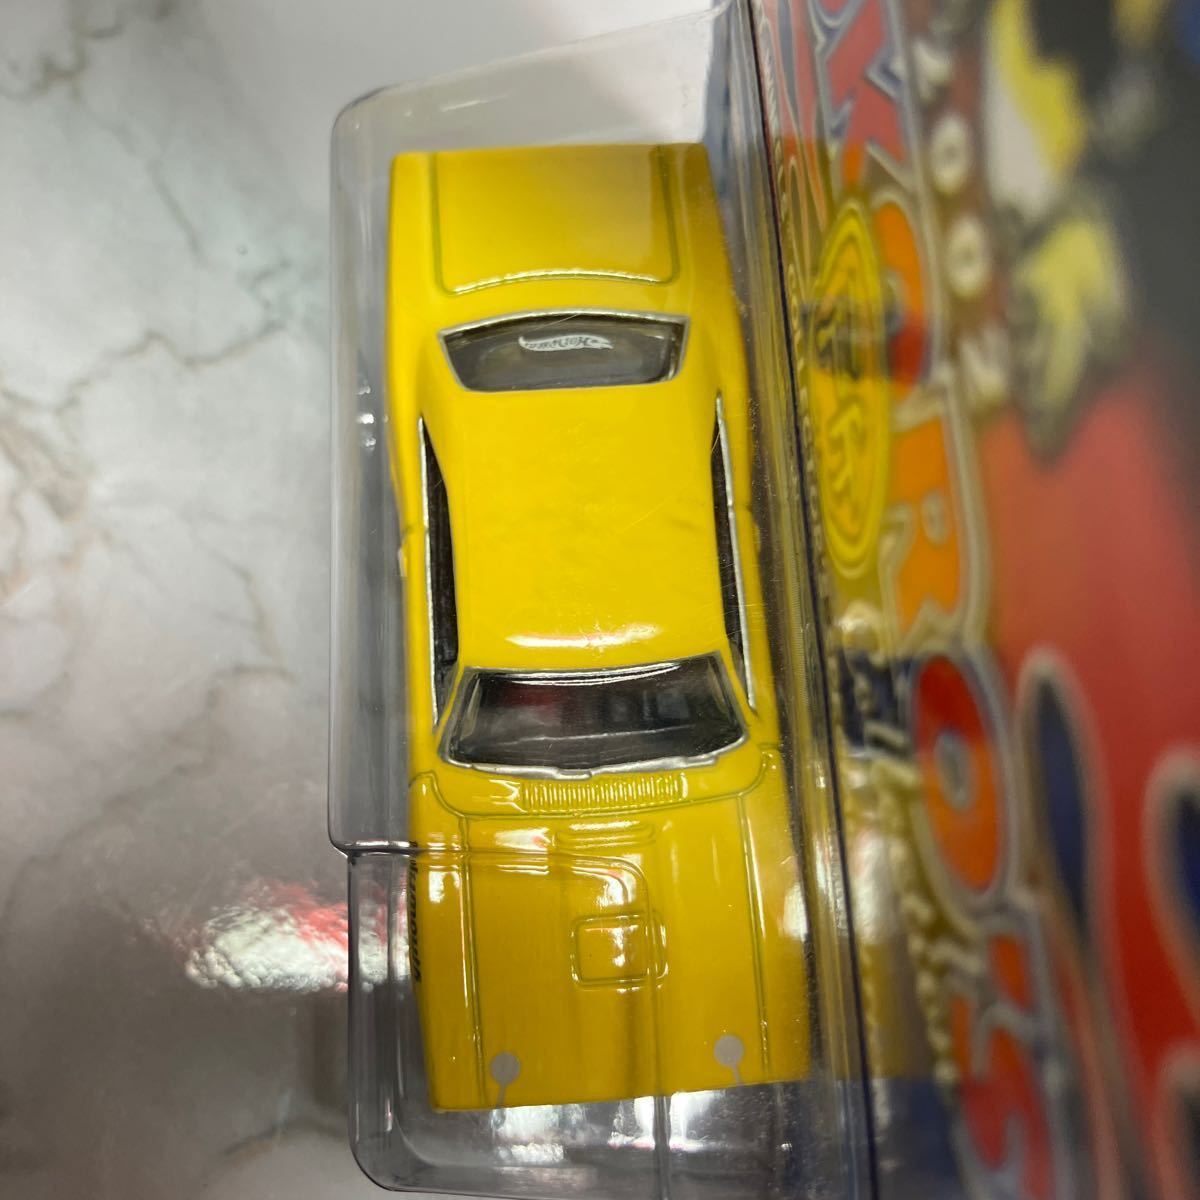 2403-3018 Hot Wheels 2002 TOKORO'S Collection 2台セット Classic Cobra / '70 Plymouth Road Runner 未開封品 60サイズ梱包予定_画像9